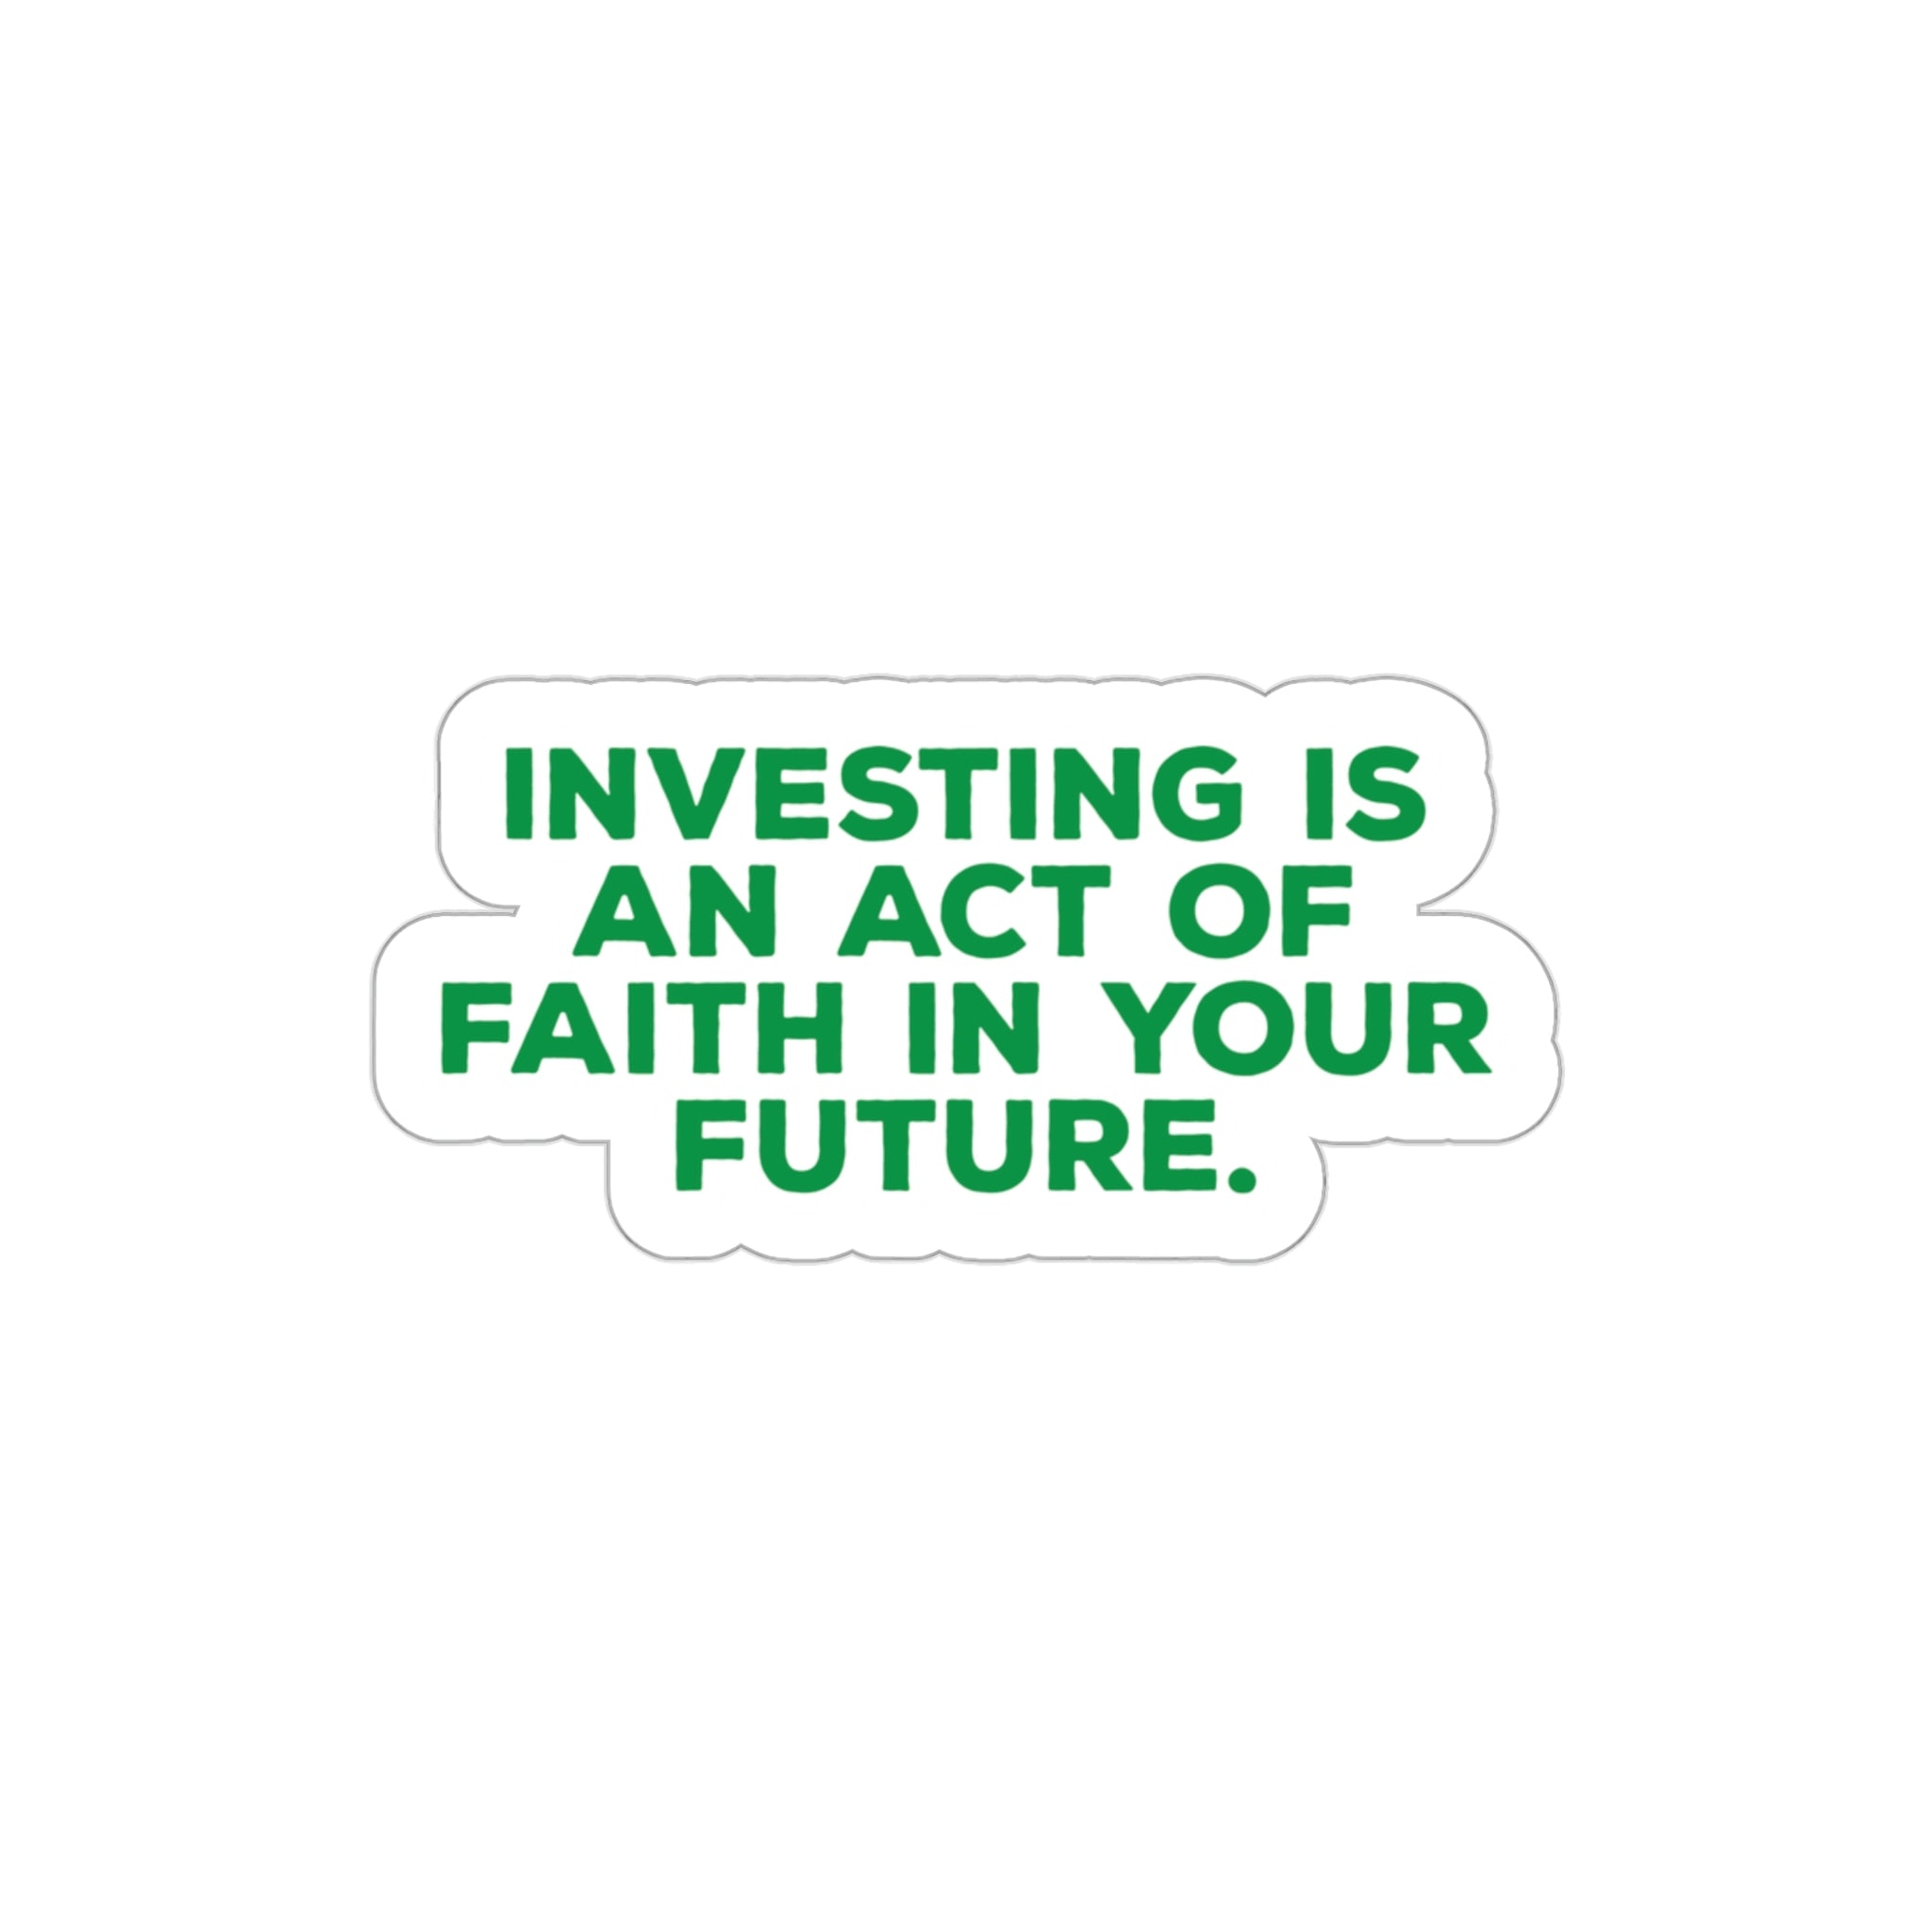 Invest in Your Future: Get a Die-Cut Vinyl Motivational Sticker Today #size_3x3-inches 